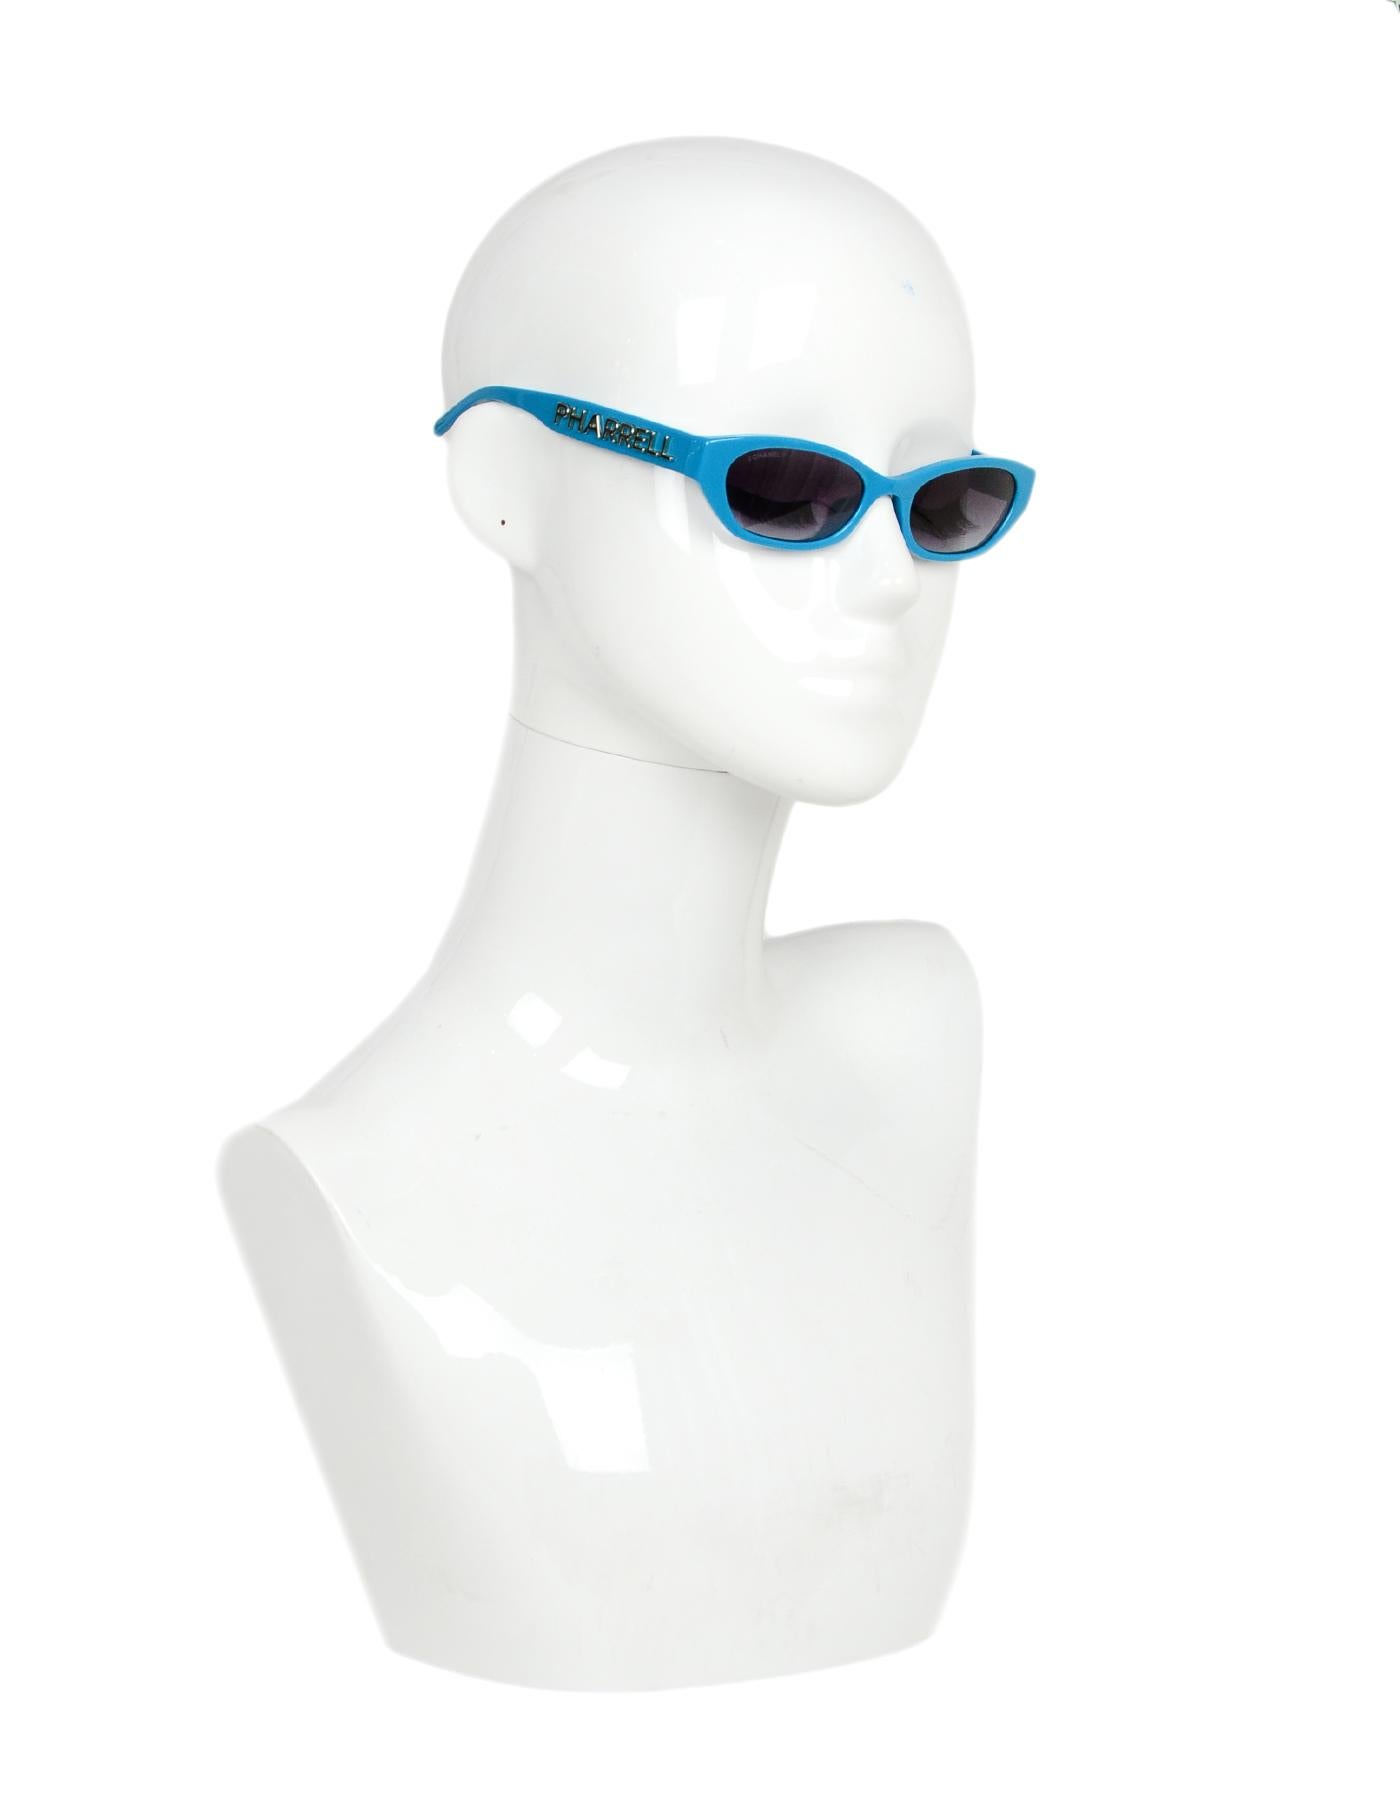 Chanel x Pharrell Williams 2019 Blue & Grey Small Rectangular Sunglasses

Made In: Italy
Year of Production: 2019
Color: Bleu, gris
Hardware: Silvertone hardware
Materials: Resin
Overall Condition: New with tags
Includes: Box, case, cleaning